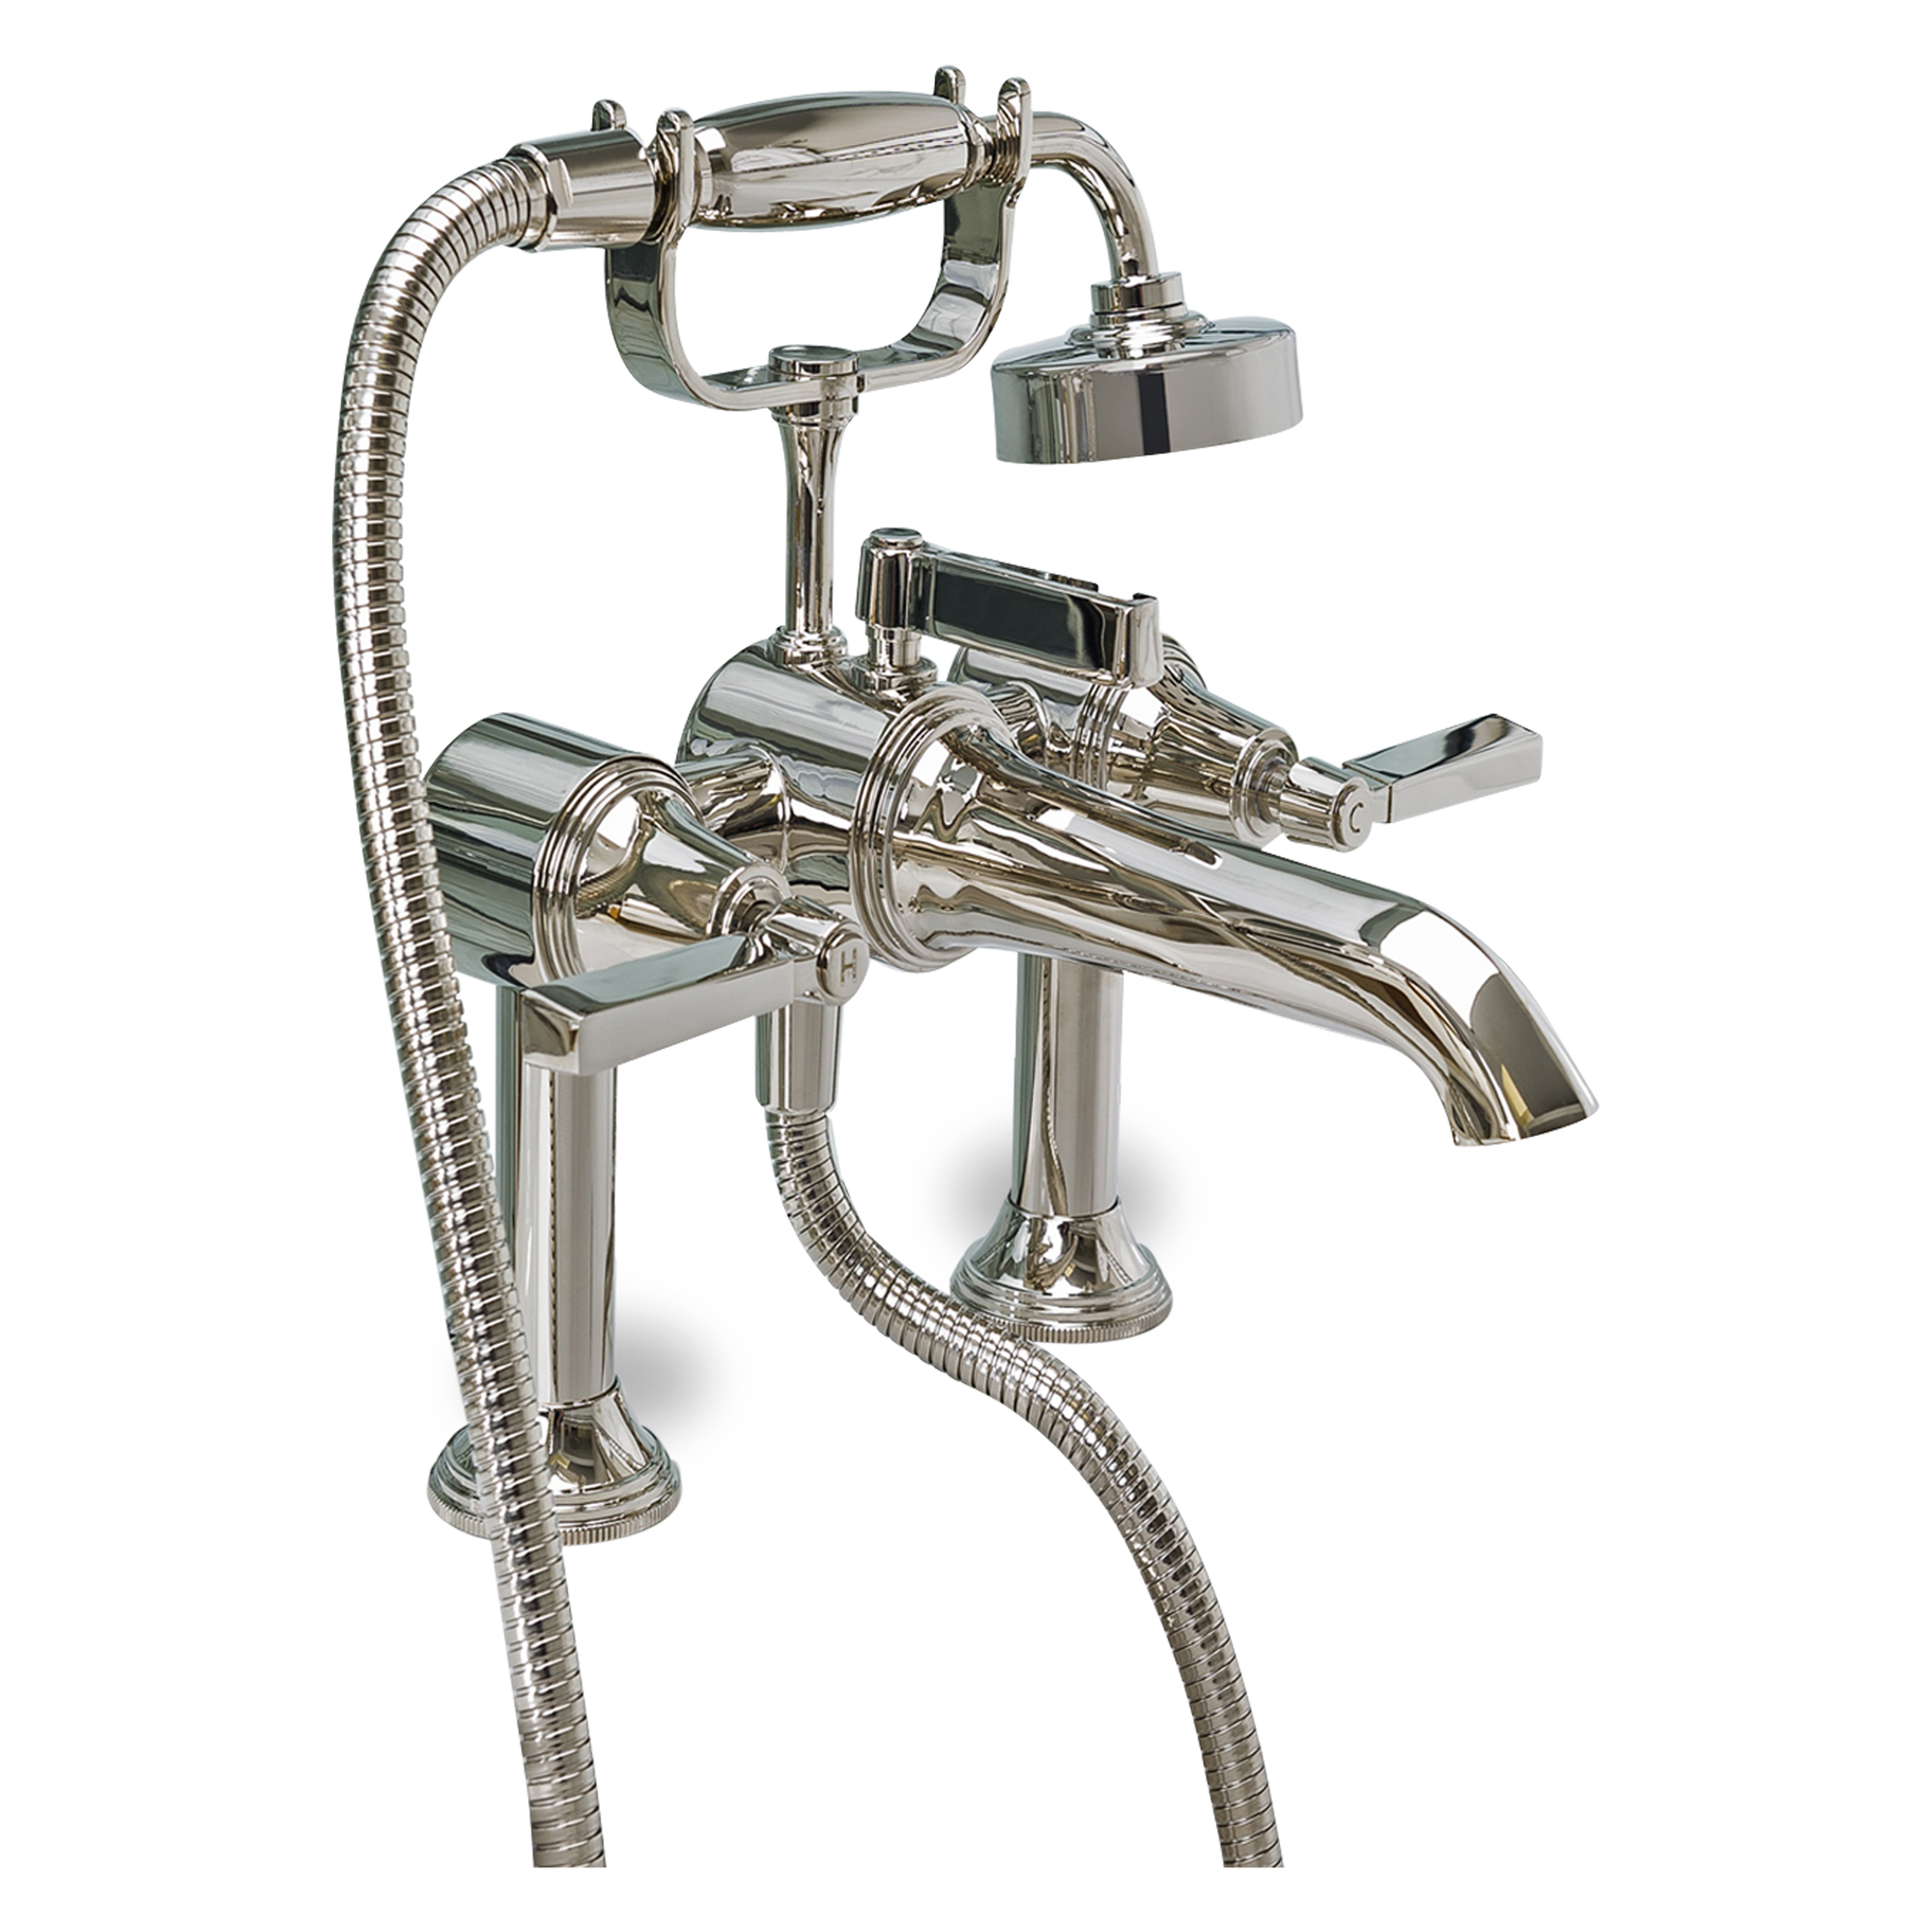 The Moderne wall mount bath shower mixer with Luxe levers.